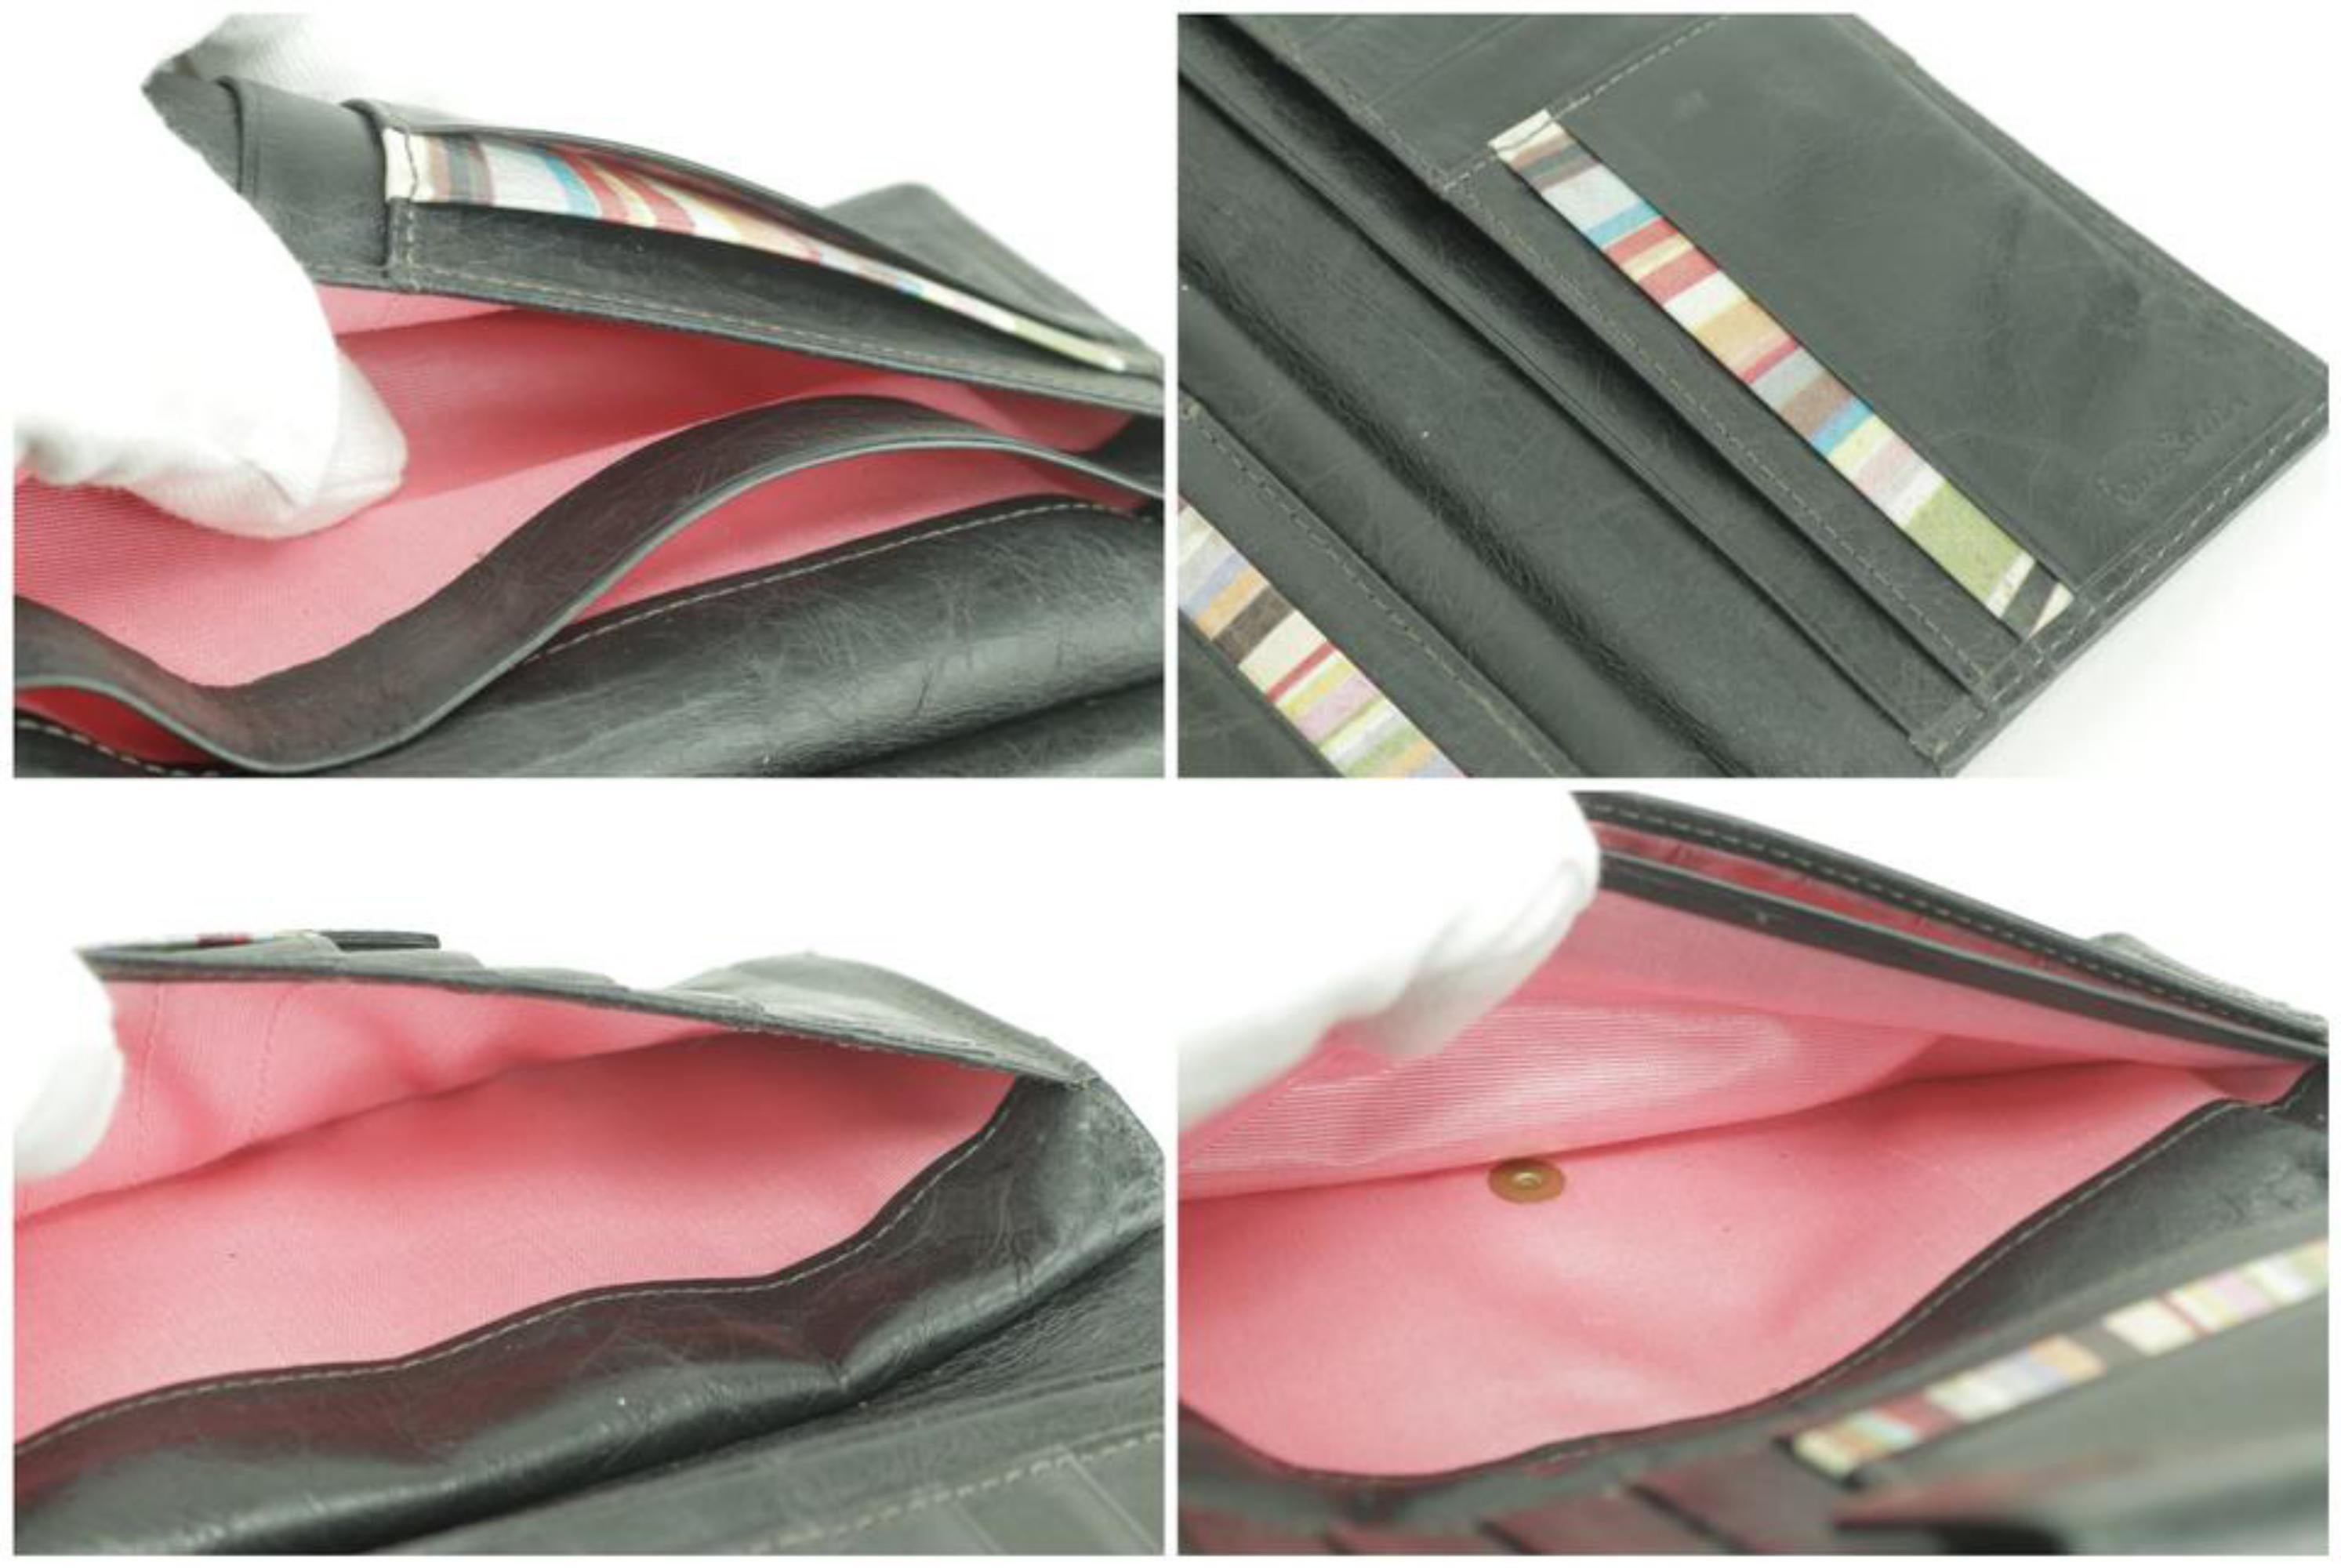 Paul Smith Belt Long Flap Wallet Black Leather Bifold 0M46 In Fair Condition For Sale In Dix hills, NY